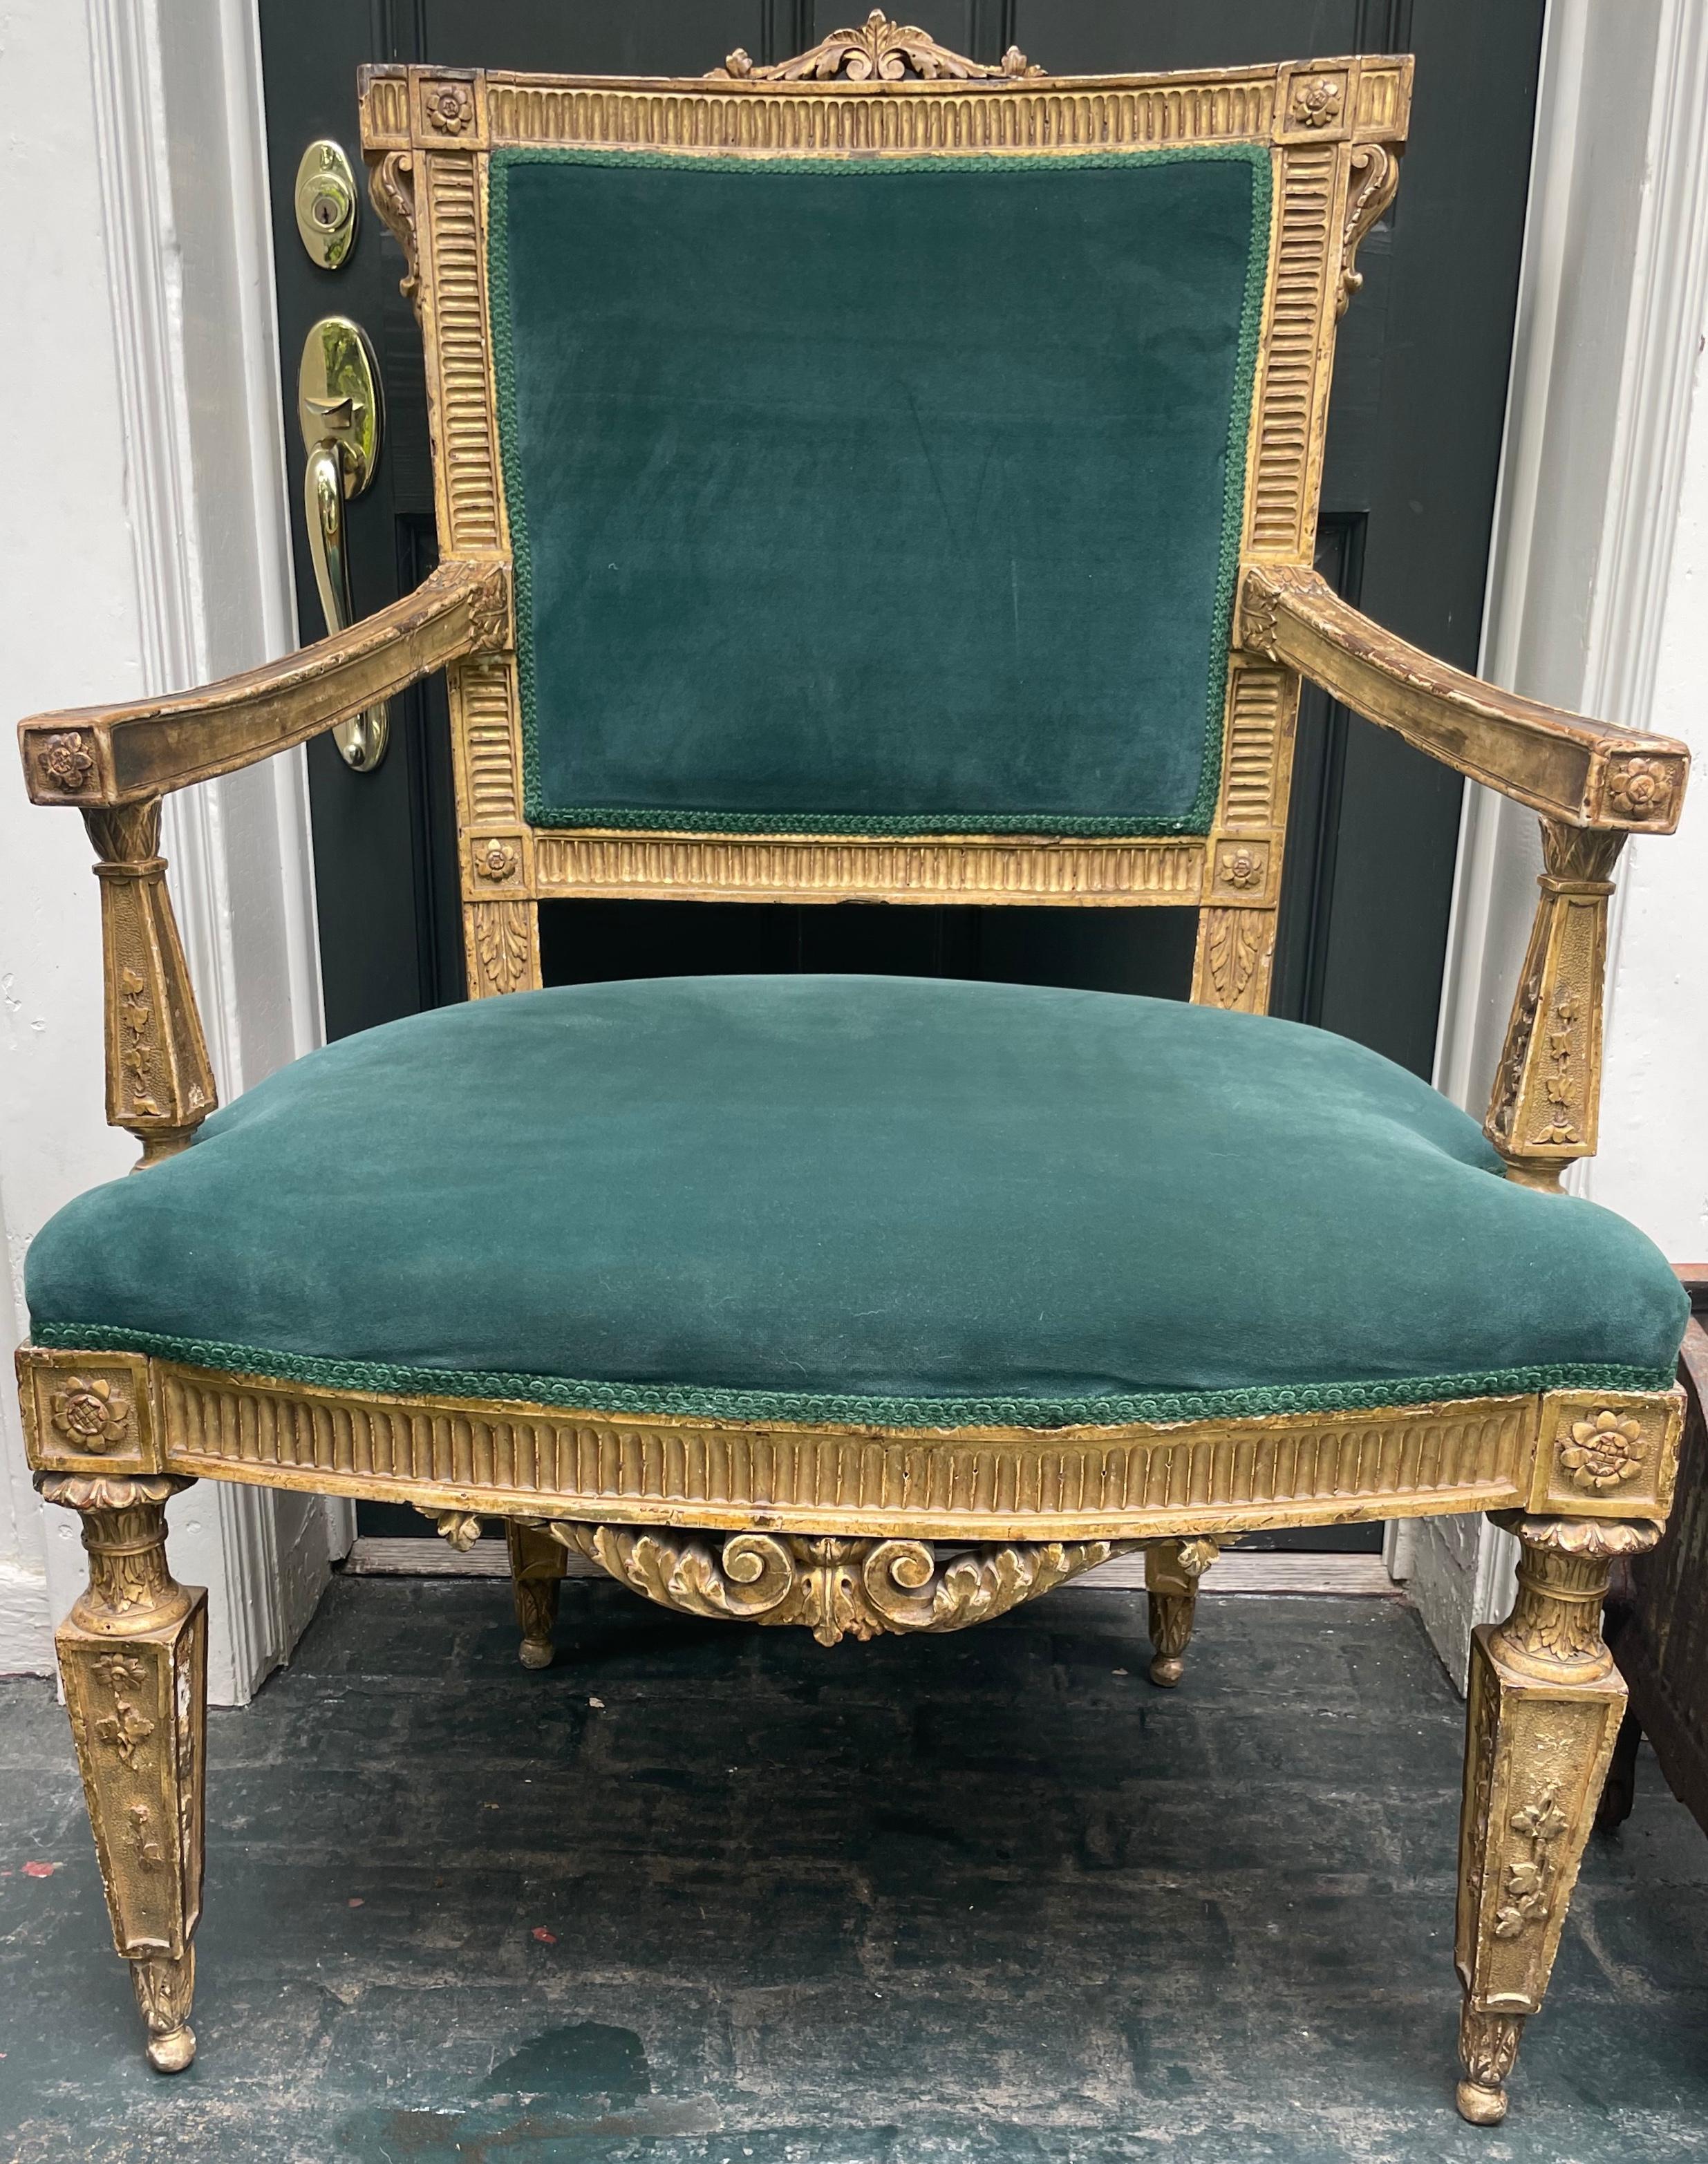 Large Louis XVI gilt carved open armchair. Handsomely carved and proportioned neoclassical fauteuil in deeply burnished gilding with wide and deep seat and broad gently curved back. Acanthus scroll elements at top of back and beneath front of seat,